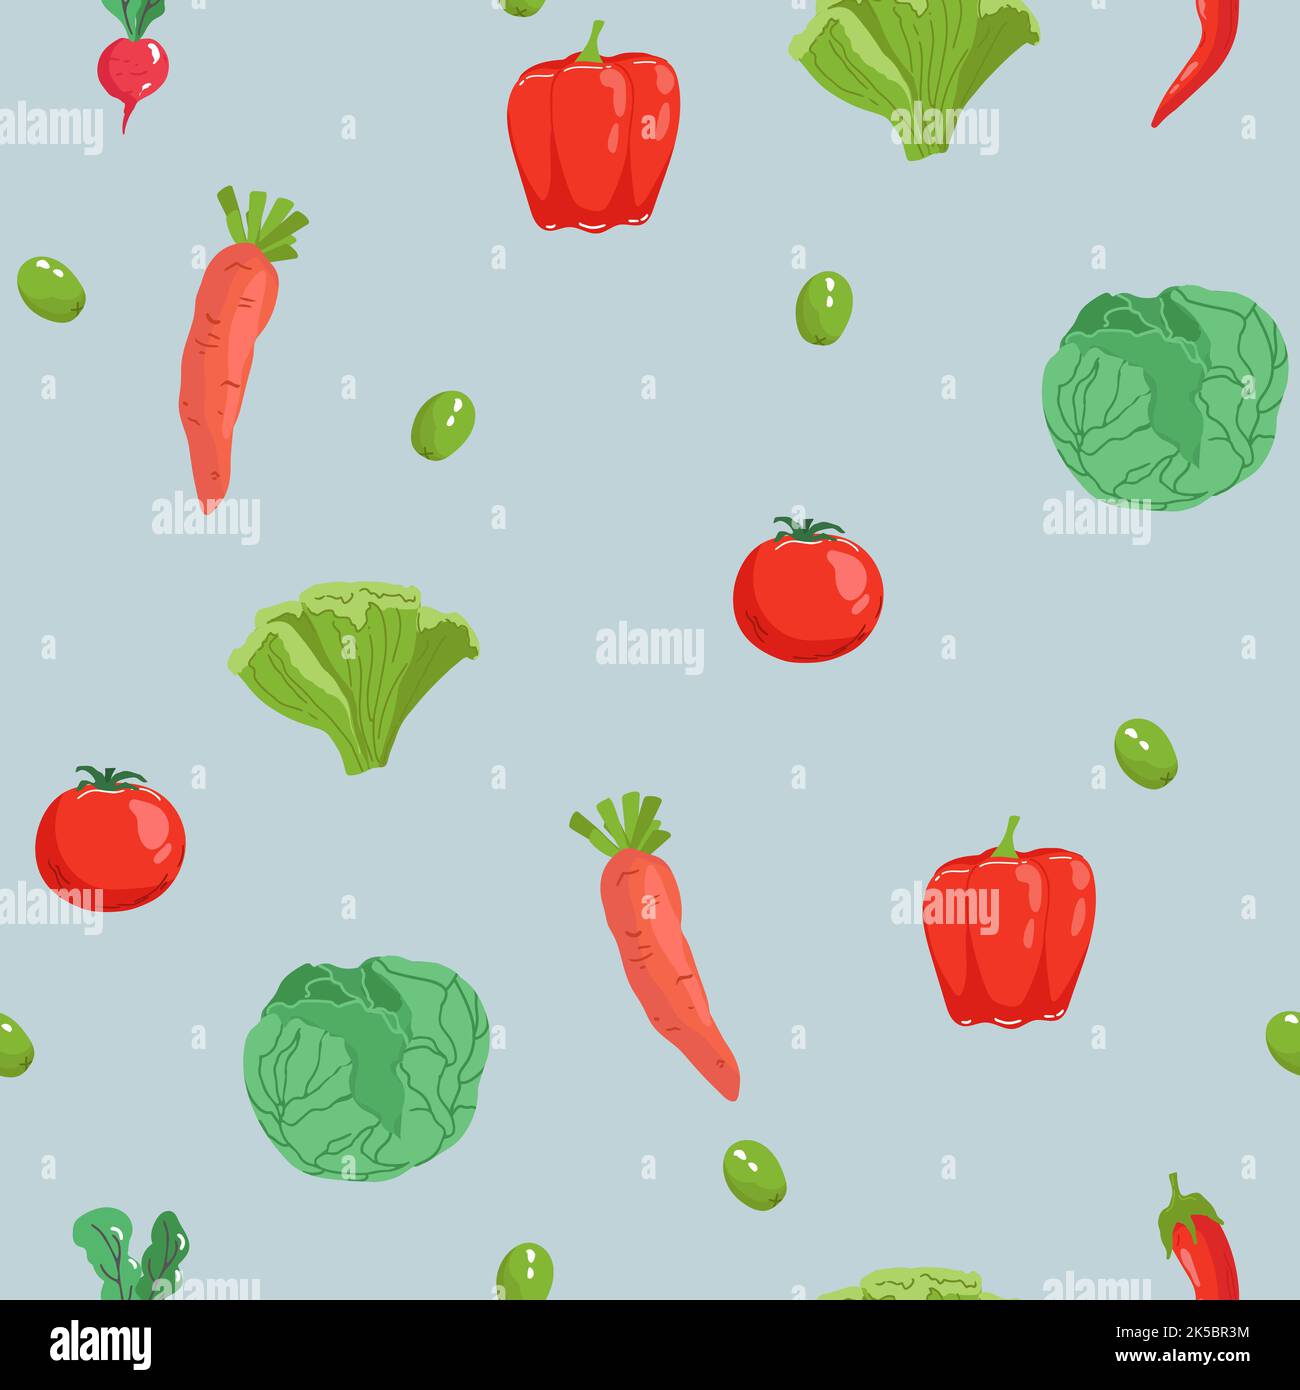 Seamless pattern with hand drawn colorful doodle vegetables. Sketch style vector set. Vegetables flat icons set: cucumber, carrot, onion, tomato. Stock Vector